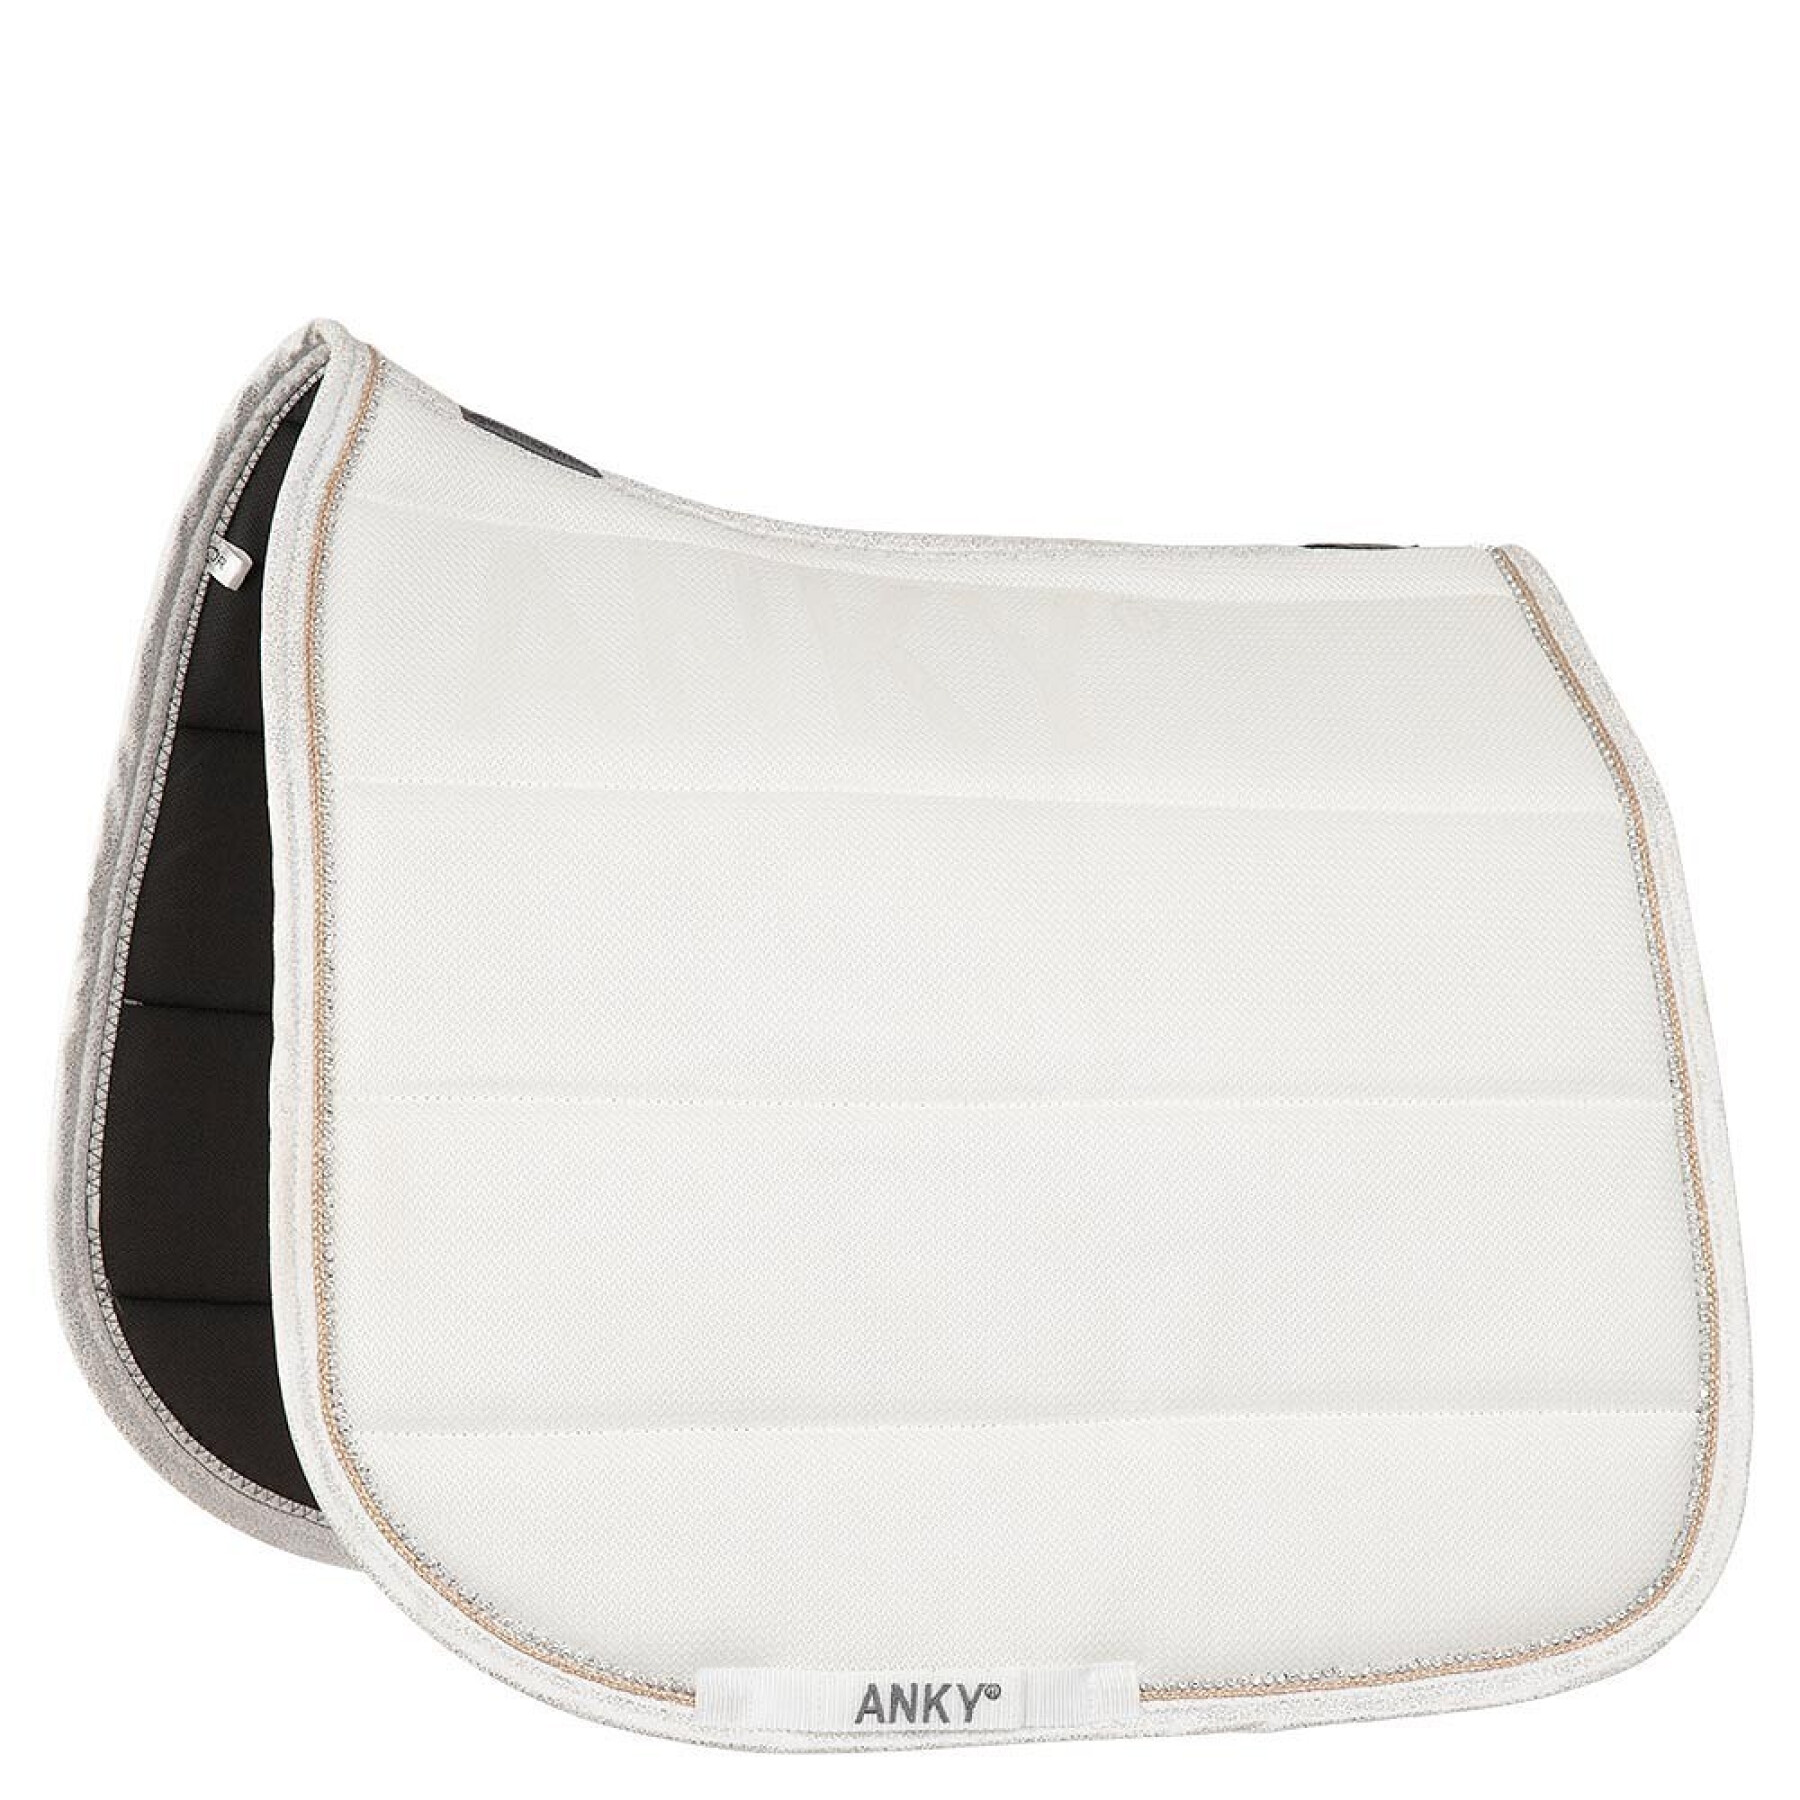 Tapis de dressage pour cheval ANKY Crystal Airstream